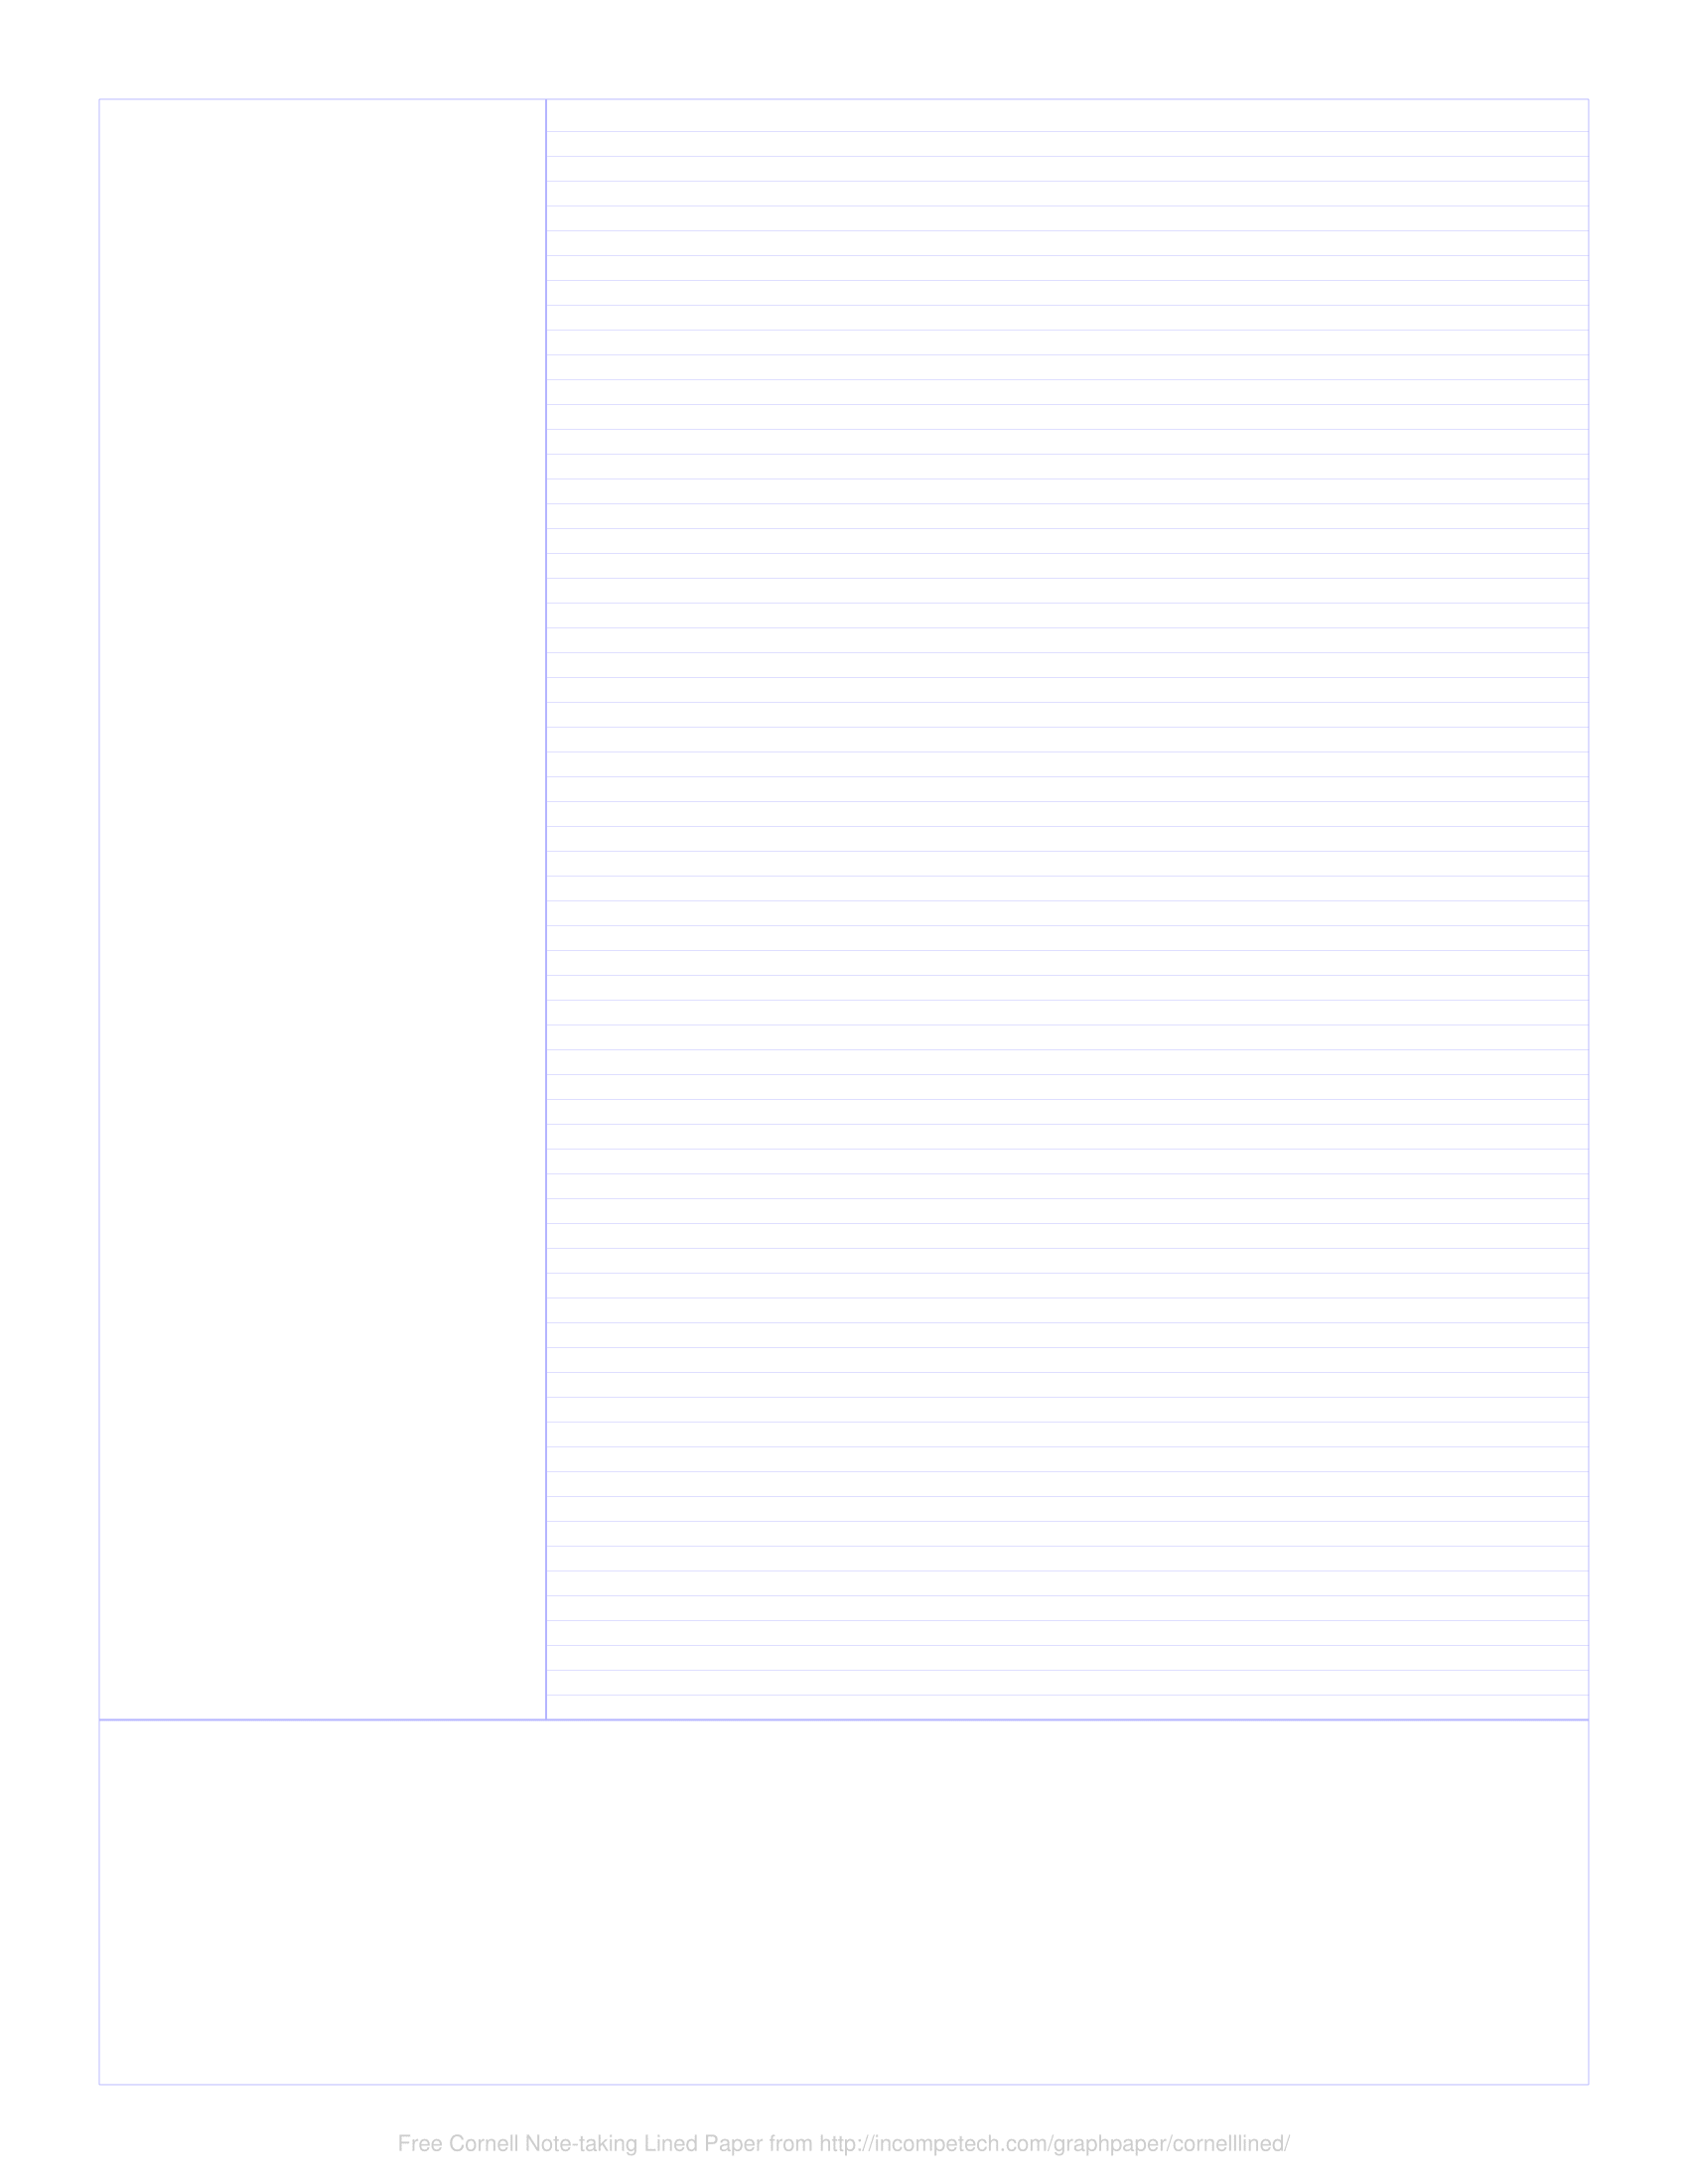 Free Online Graph Paper / Cornell Note-taking Lined Regarding Avid Cornell Note Template